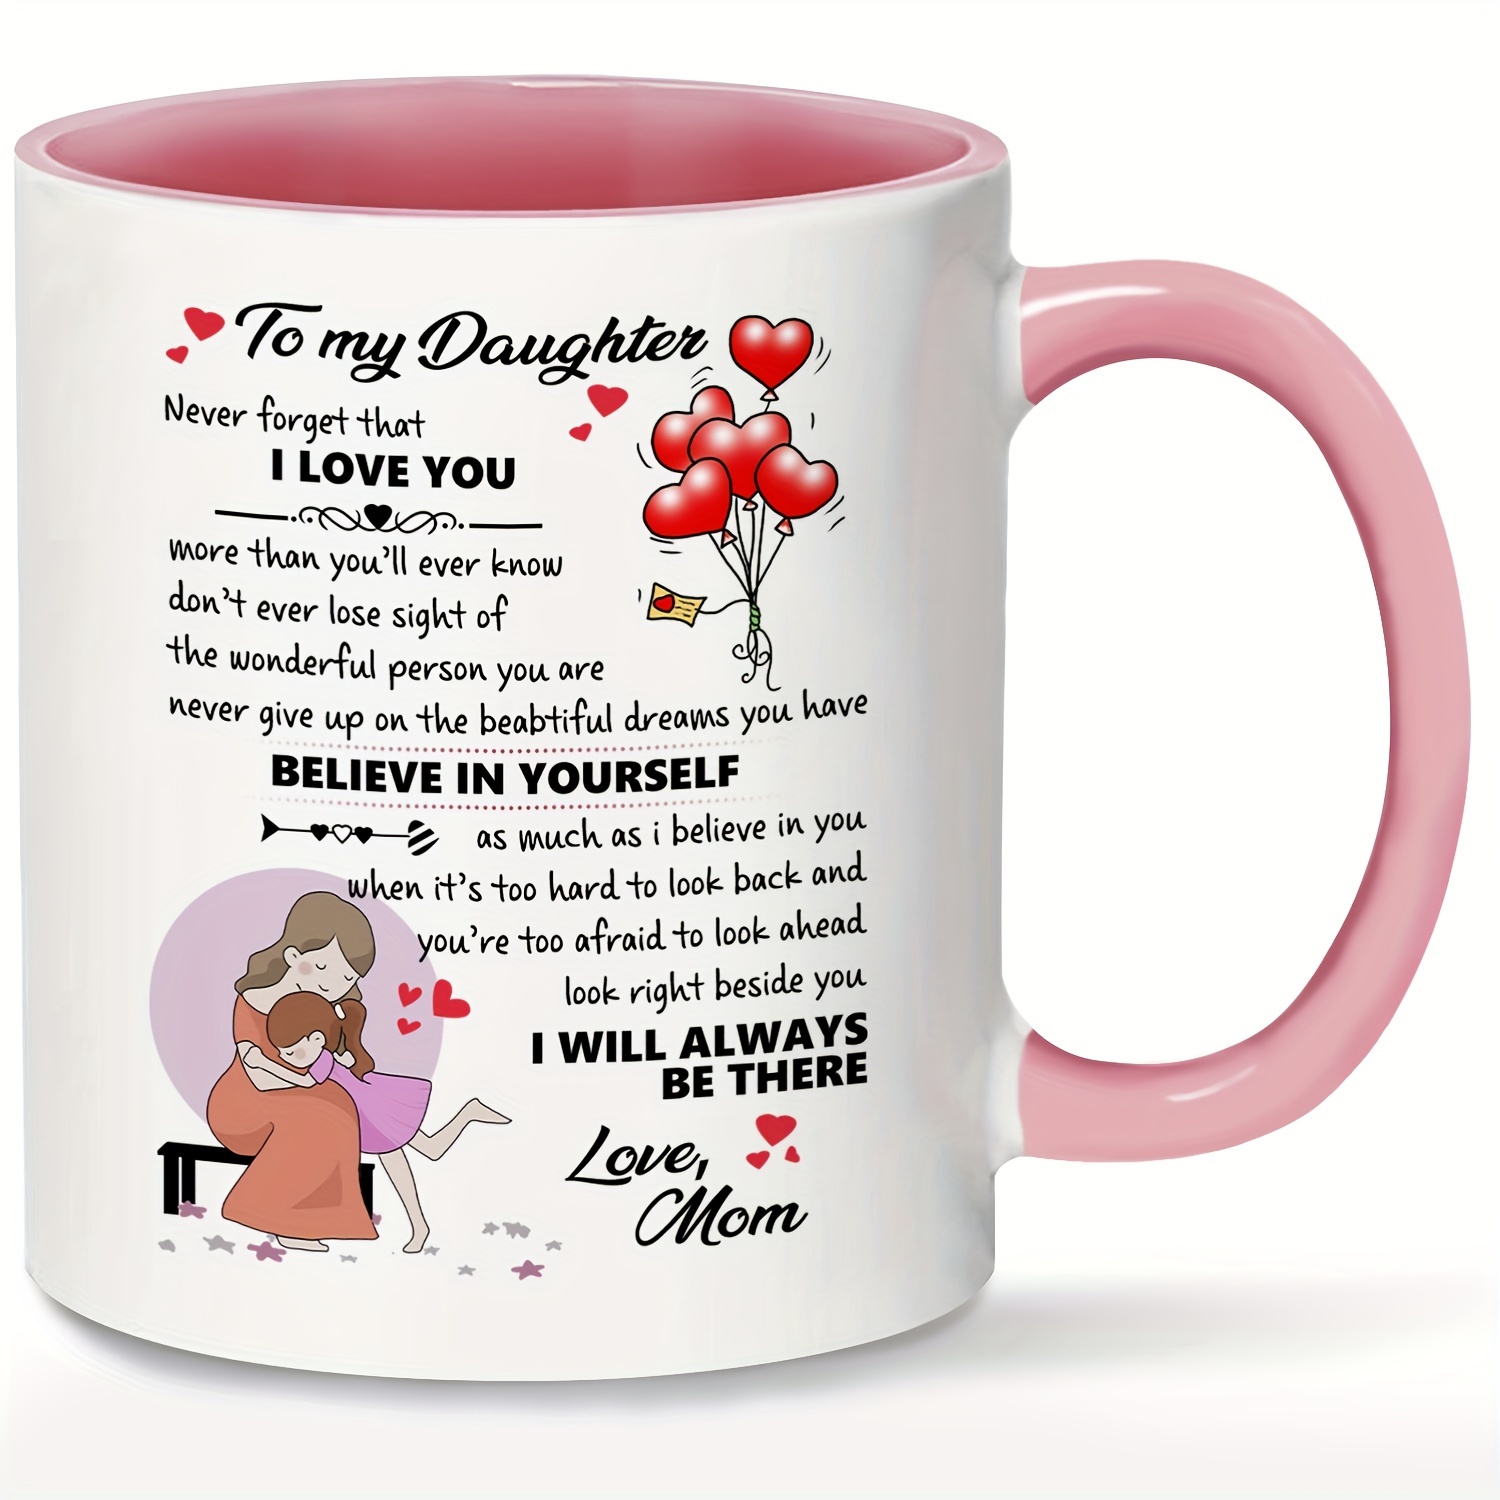 

Cherished Daughter 11oz Ceramic Coffee Mug - Perfect Birthday Gift From Mom, Insulated & Reusable, Pink